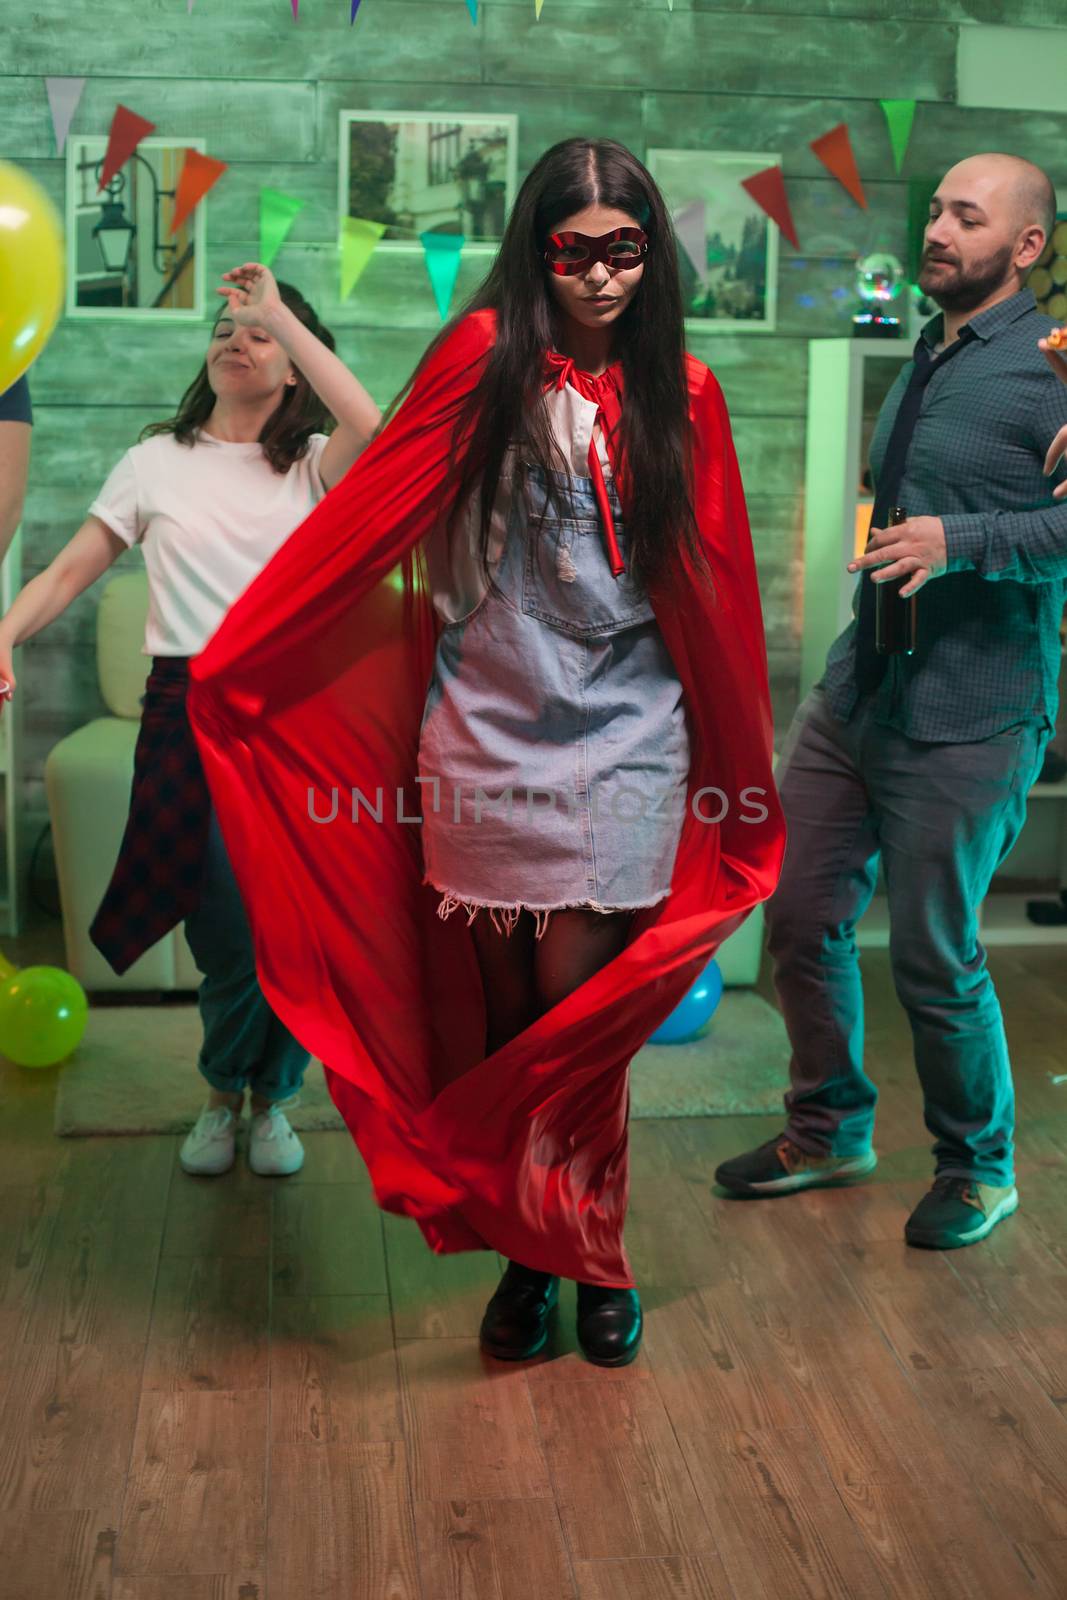 Cheerful young woman dressed up like a superhero at friends party.